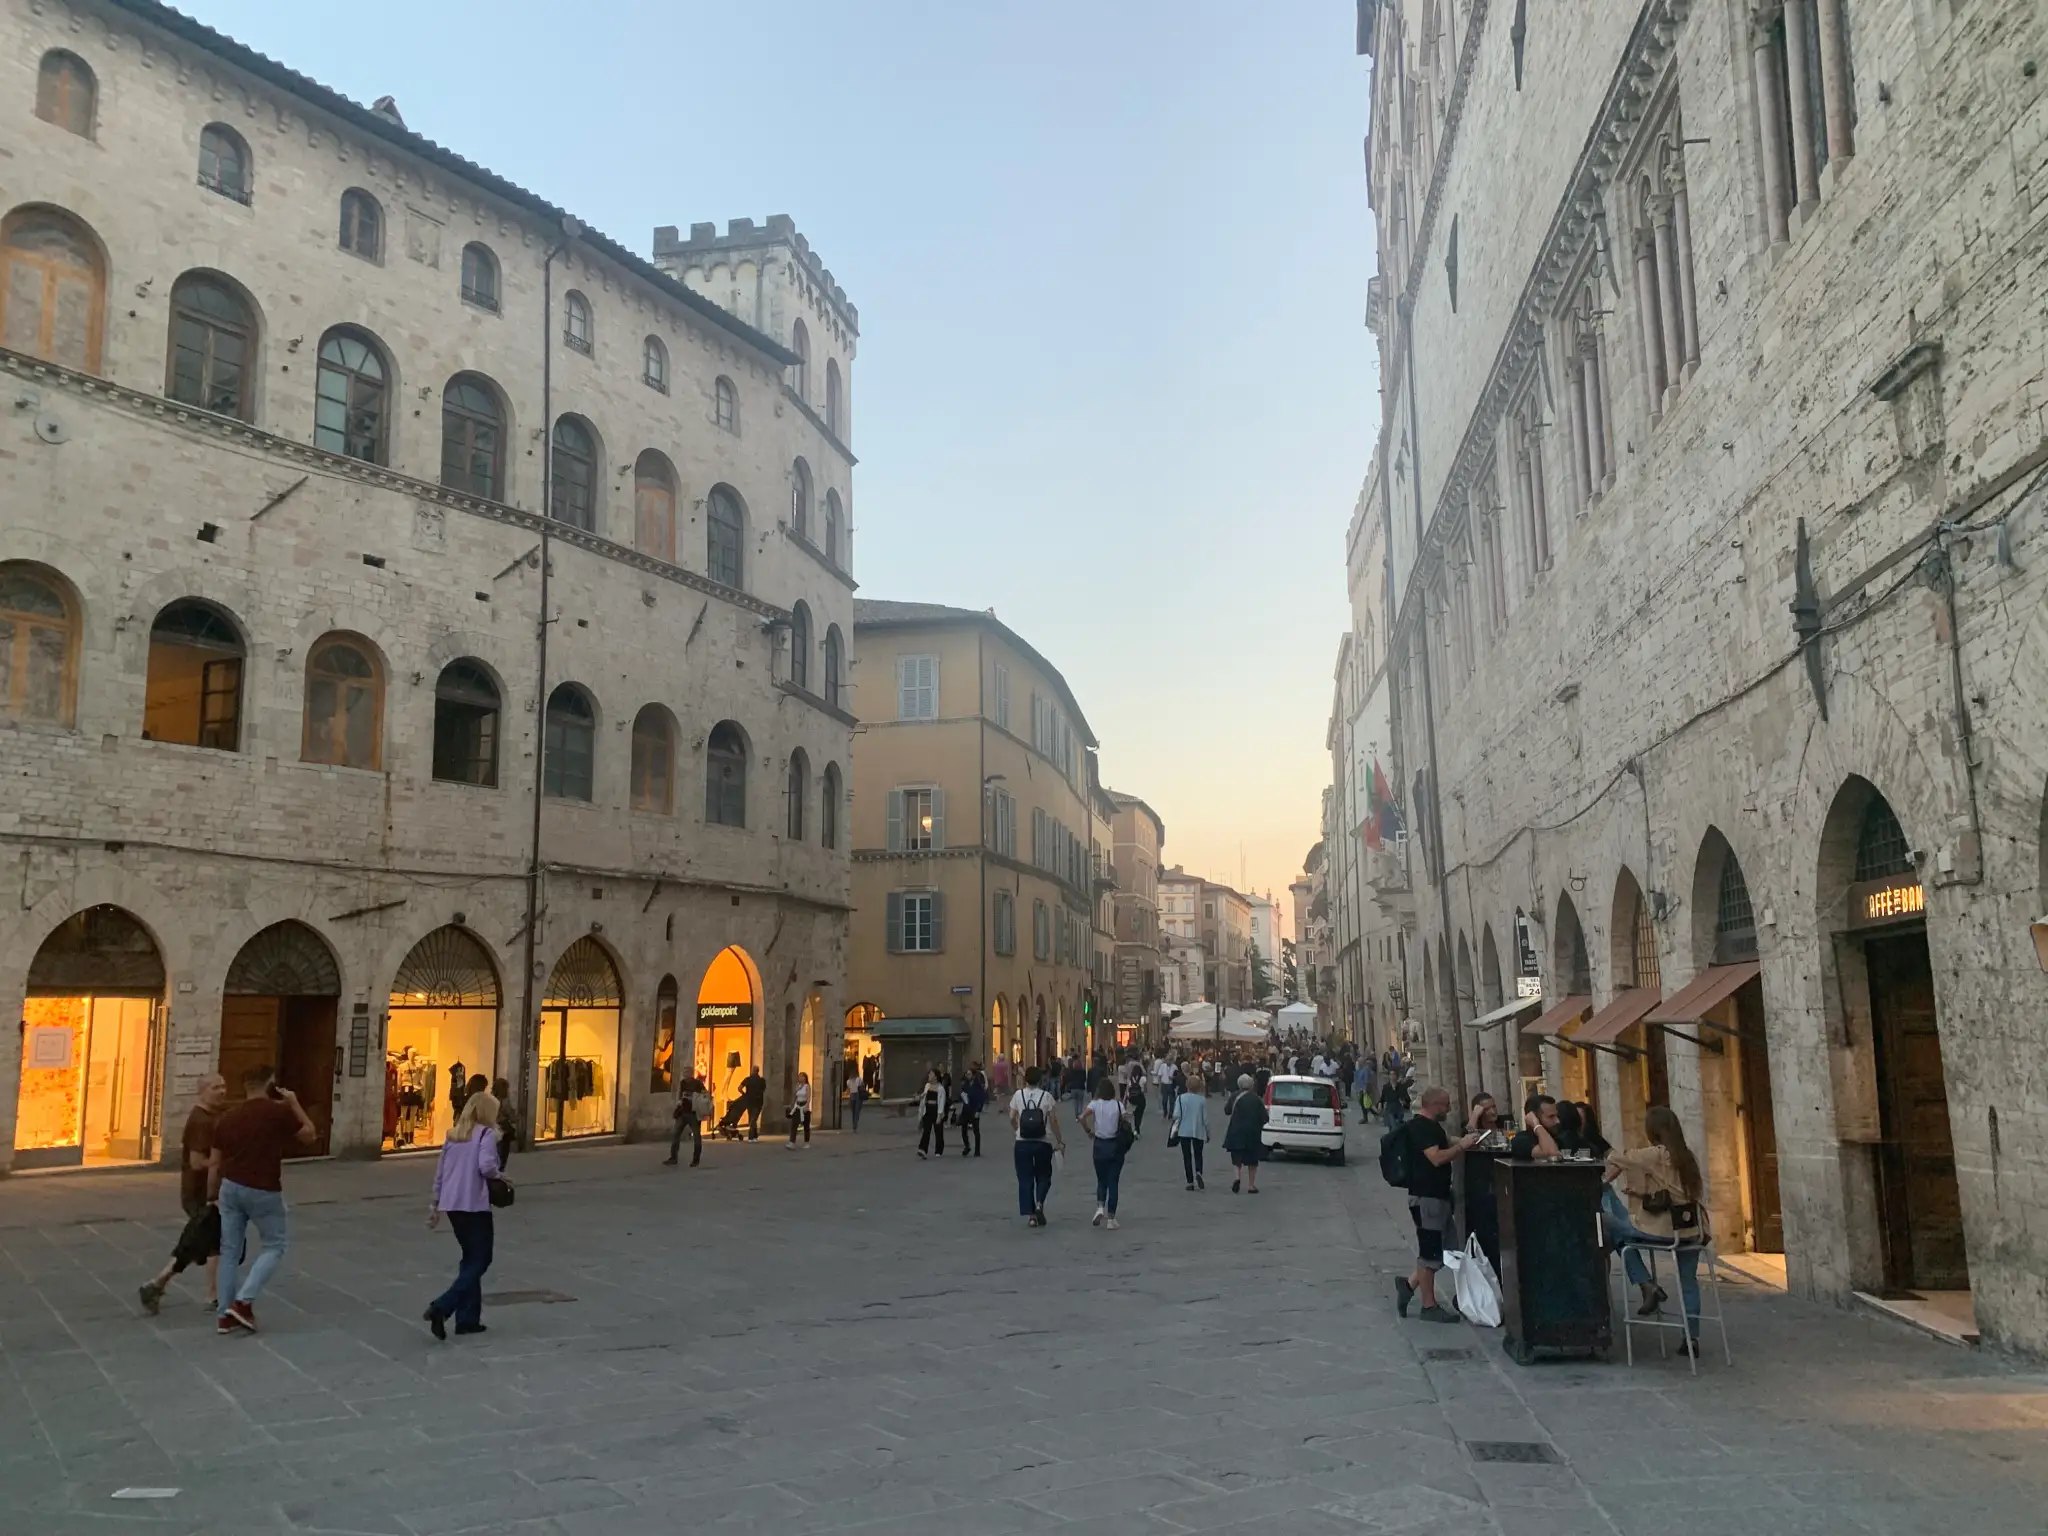 The sunset down the street in Perugia, Italy.